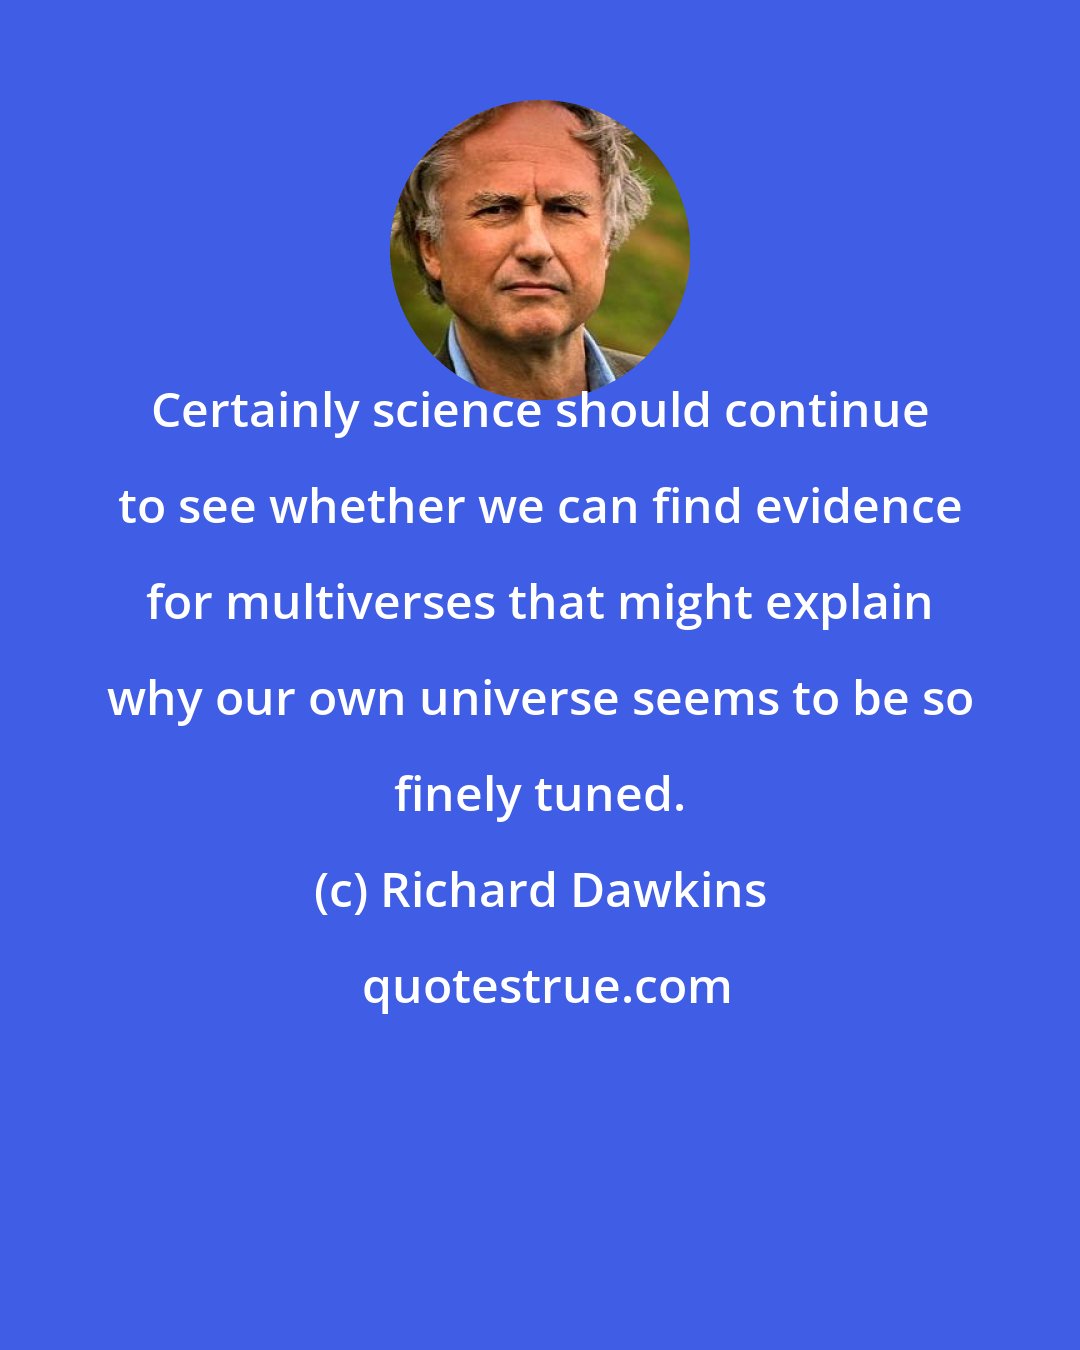 Richard Dawkins: Certainly science should continue to see whether we can find evidence for multiverses that might explain why our own universe seems to be so finely tuned.